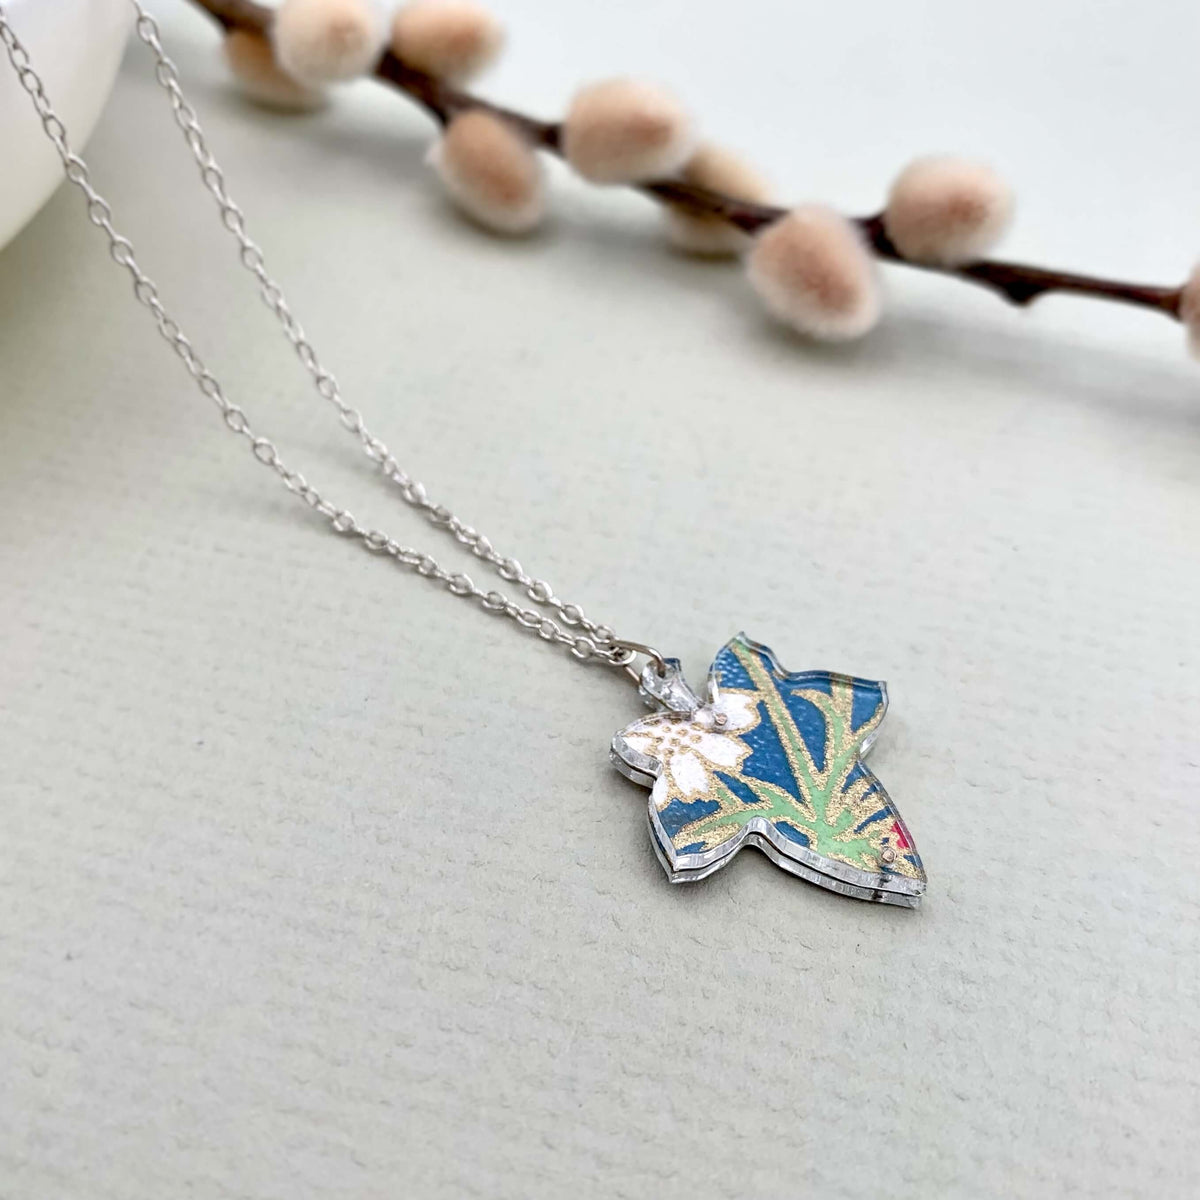 Handmade silver necklace with a colourful leaf pendant, made up of blue and green floral hand painted paper, sandwiched between two pieces of perspex.